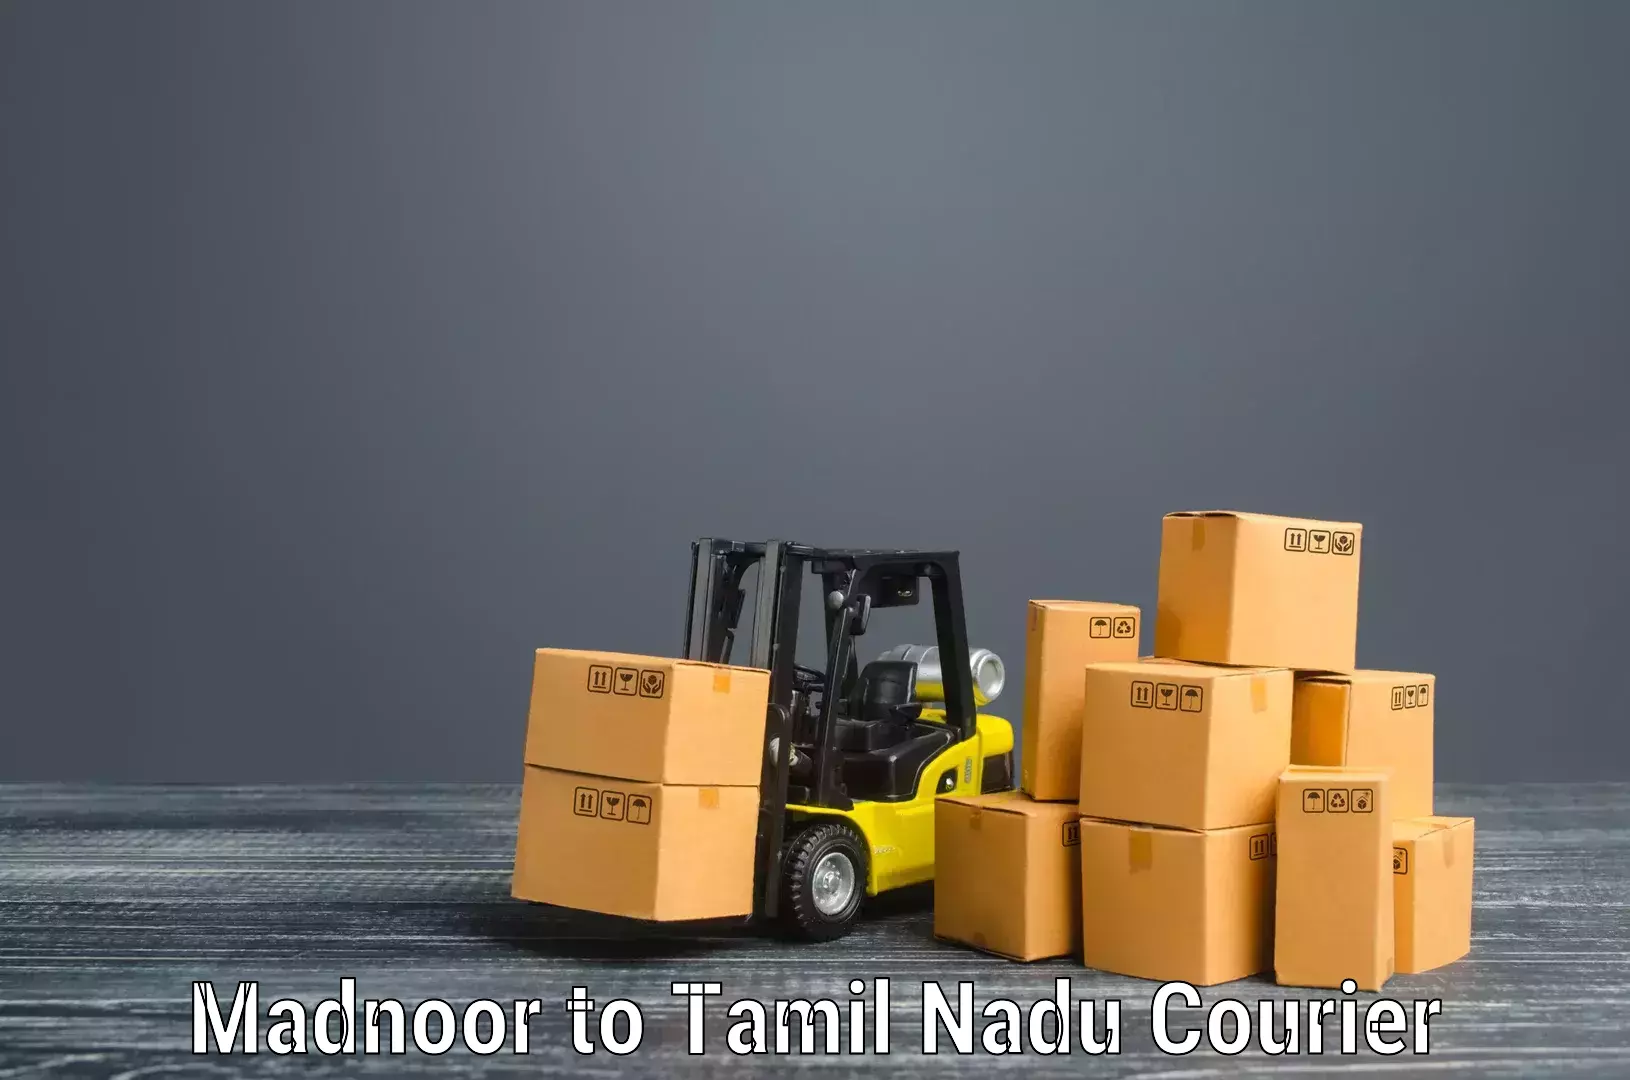 Professional home movers Madnoor to Palladam